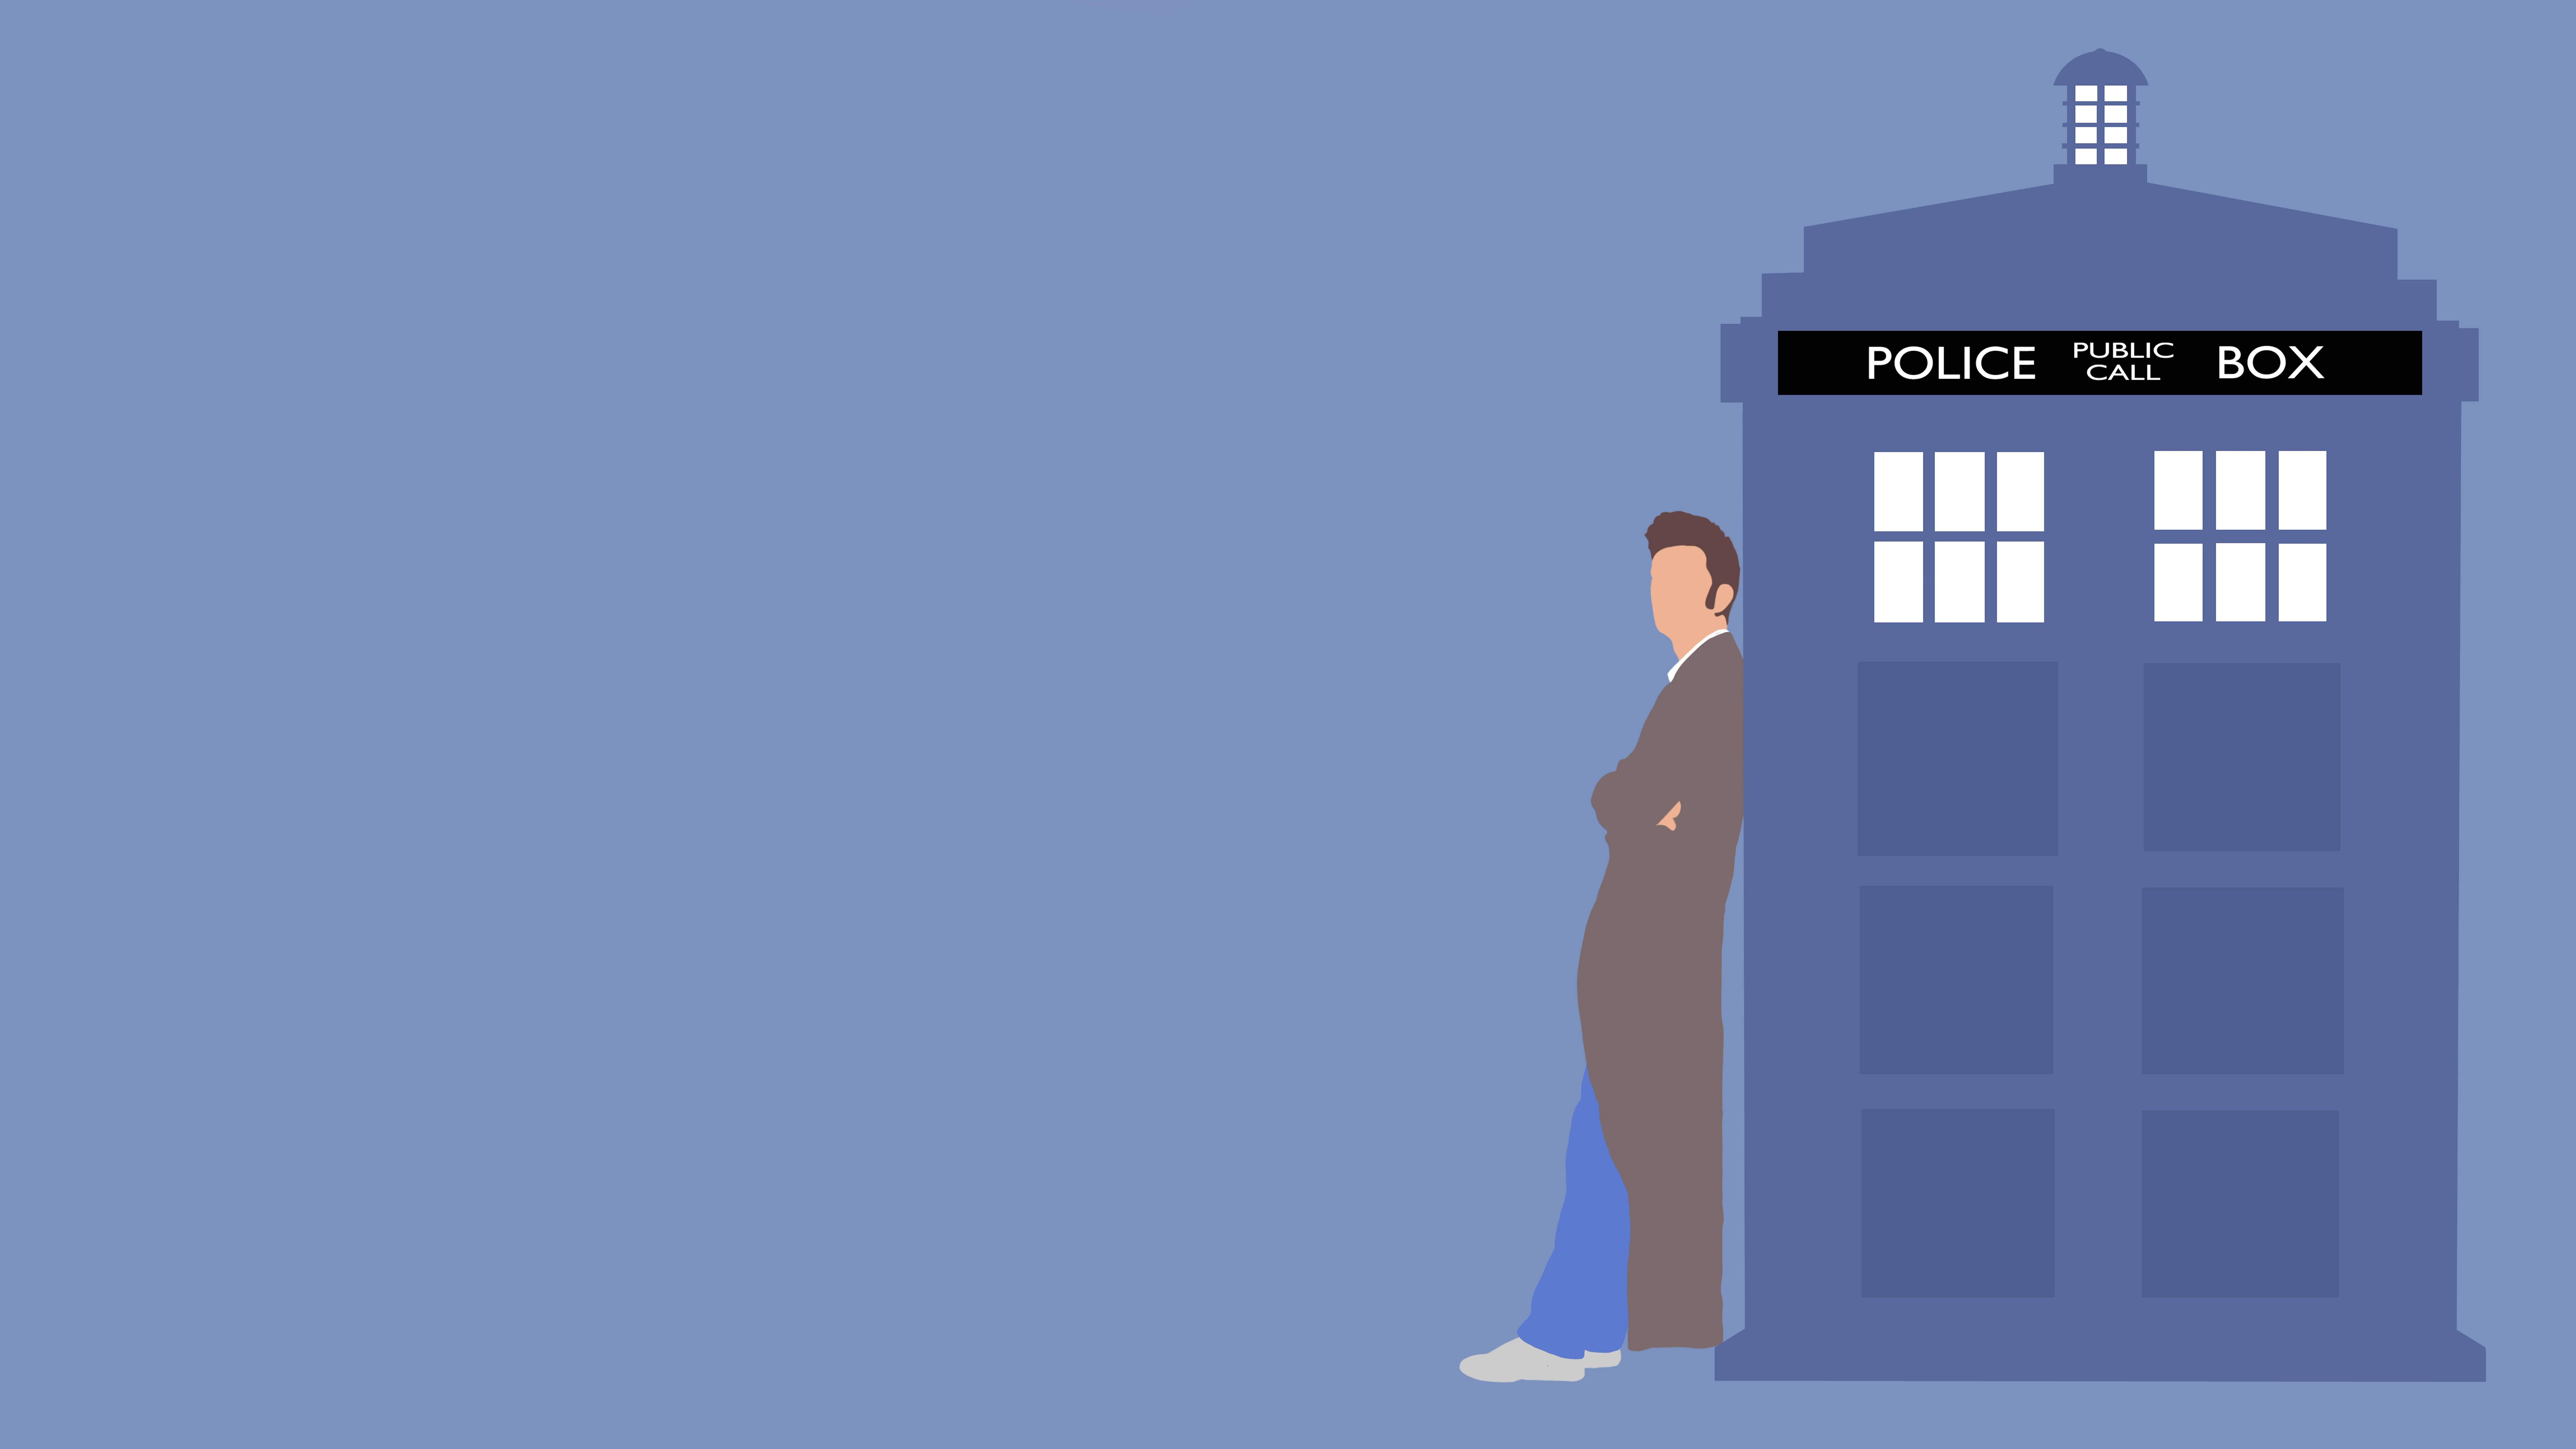 Tenth Doctor Wallpaper [16:9] More in comments